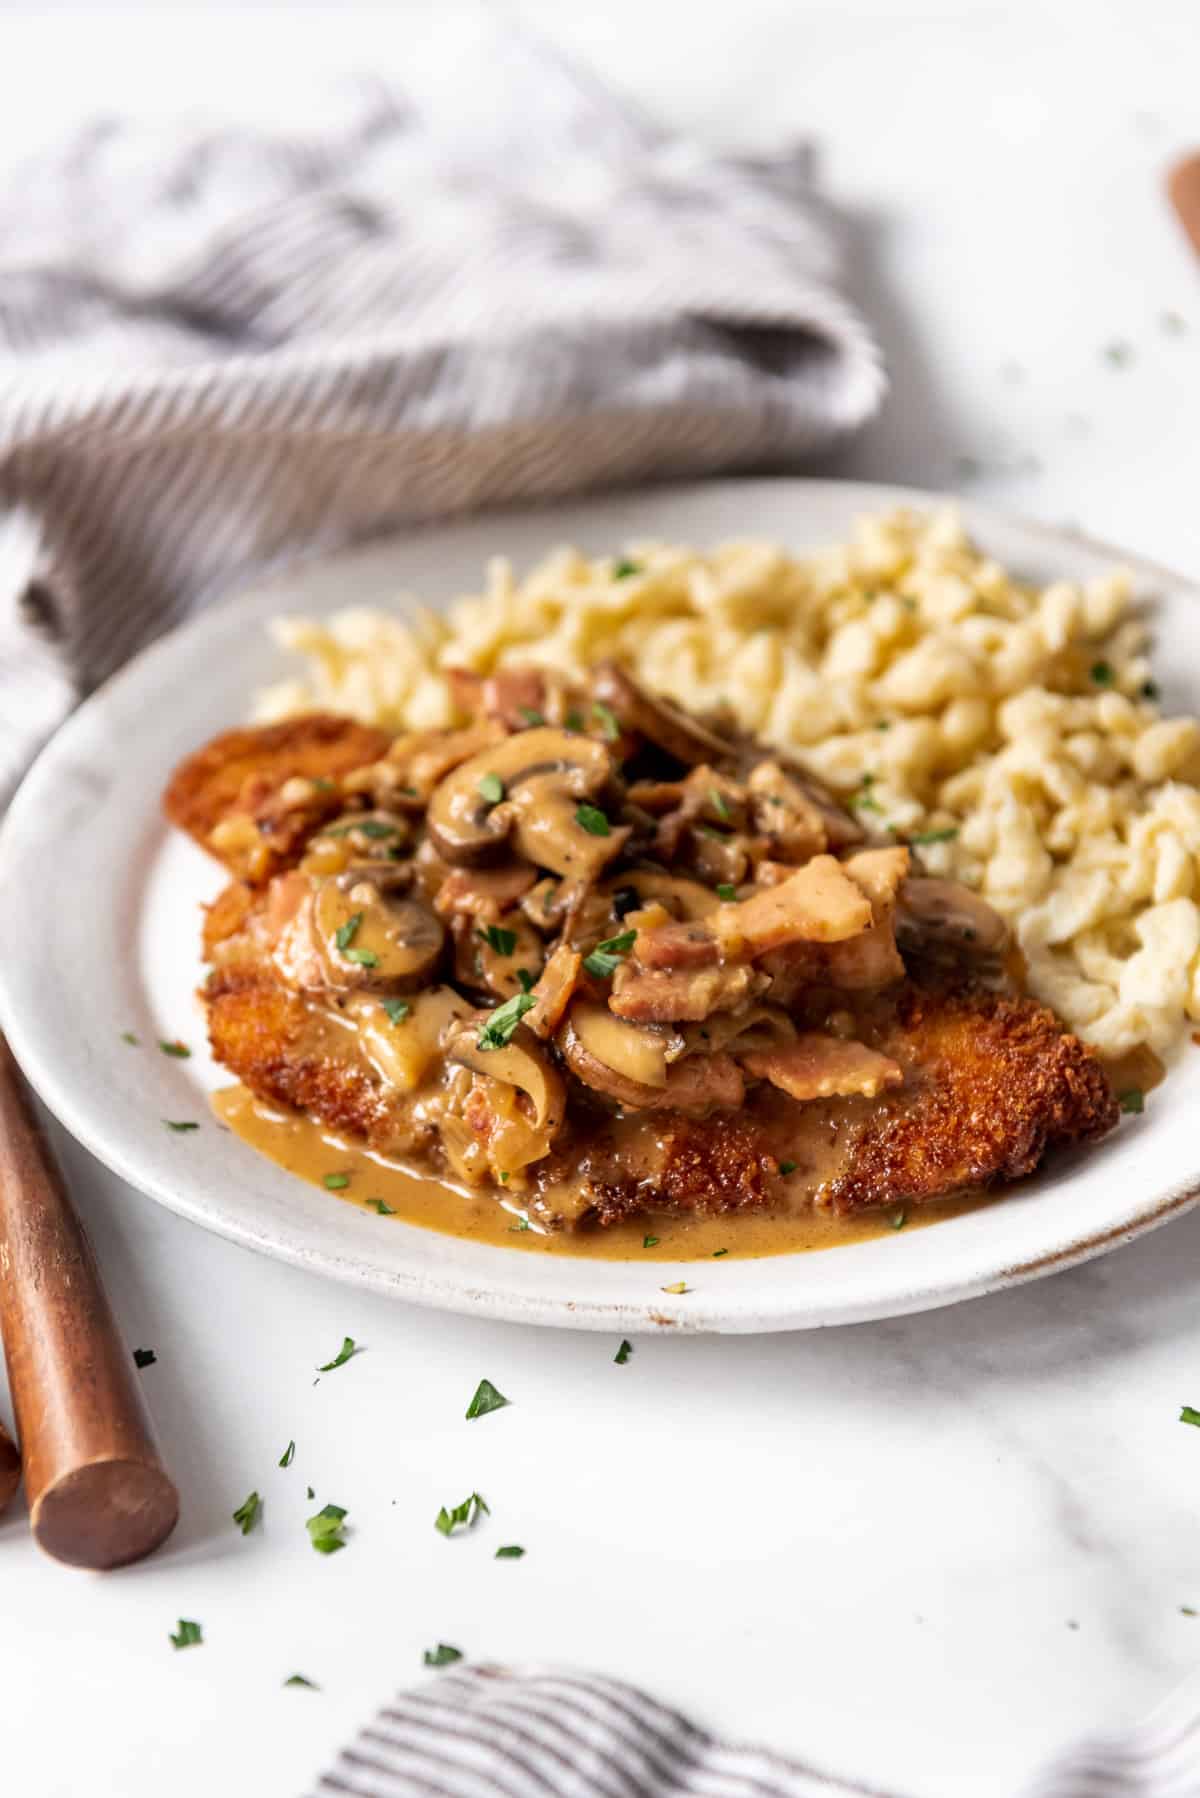 A serving of pork schnitzel topped with brown mushroom gravy and bacon on a plate with noodles.